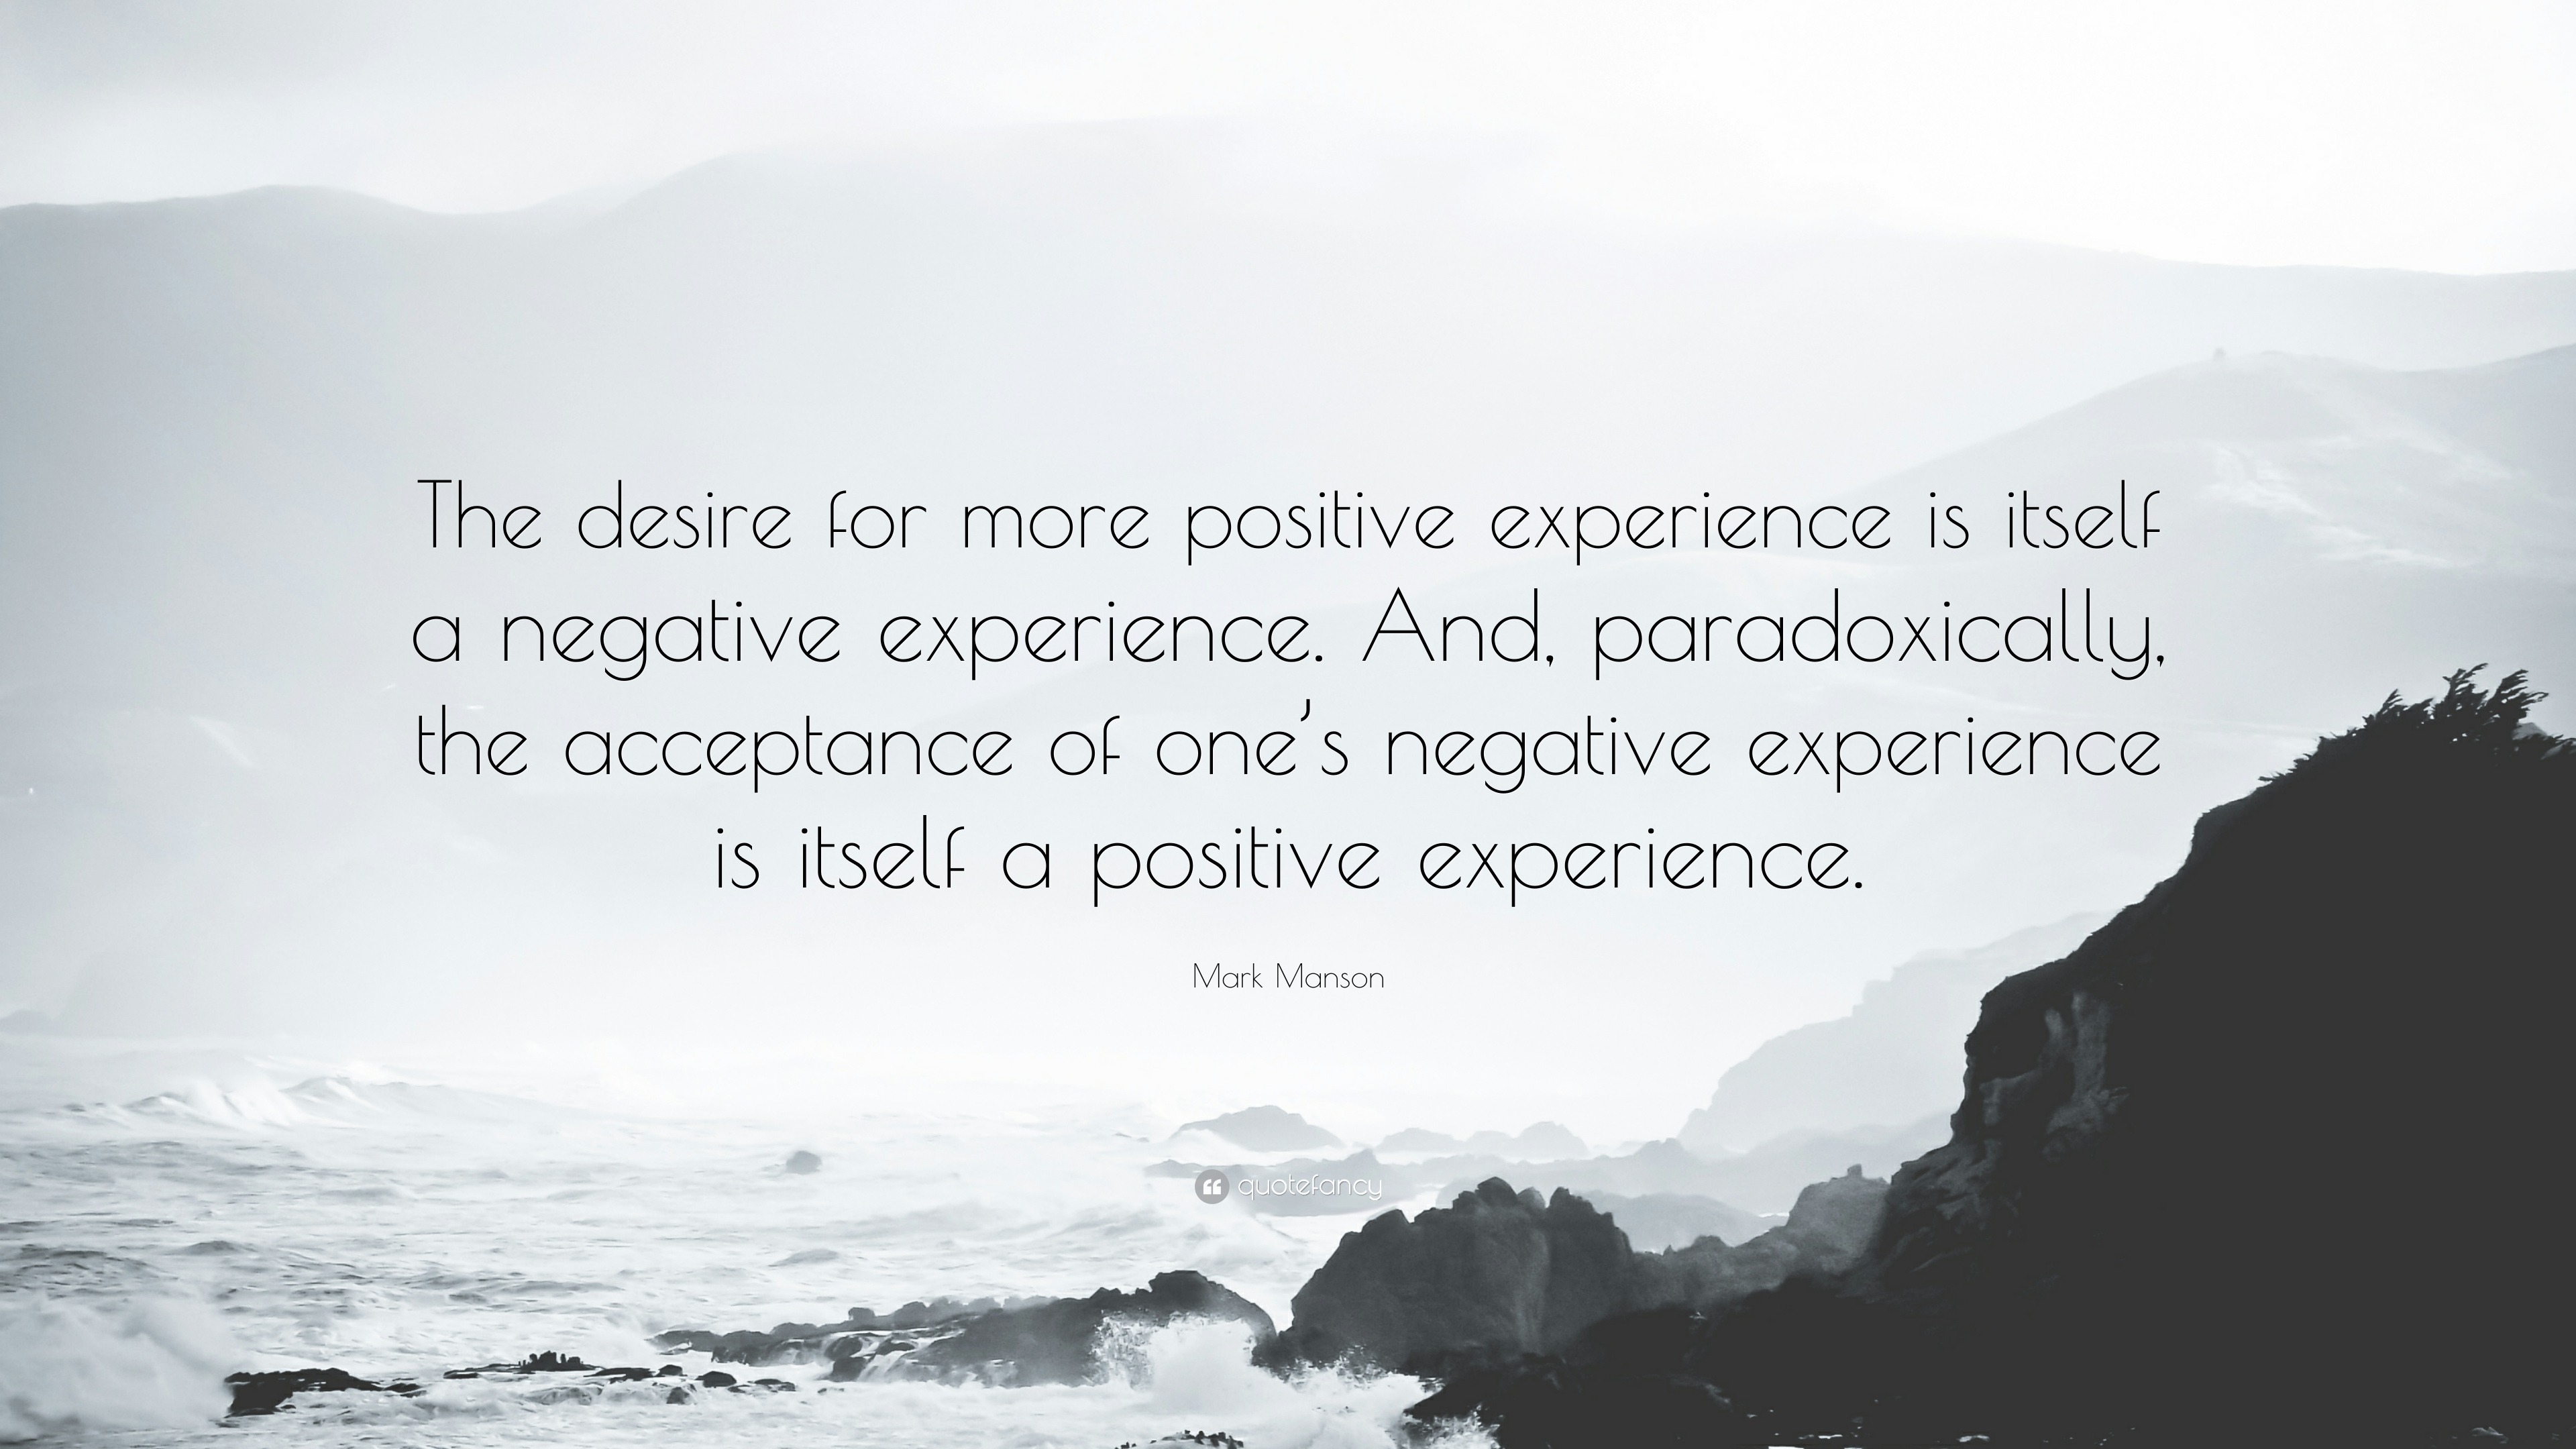 https://quotefancy.com/media/wallpaper/3840x2160/6371125-Mark-Manson-Quote-The-desire-for-more-positive-experience-is.jpg